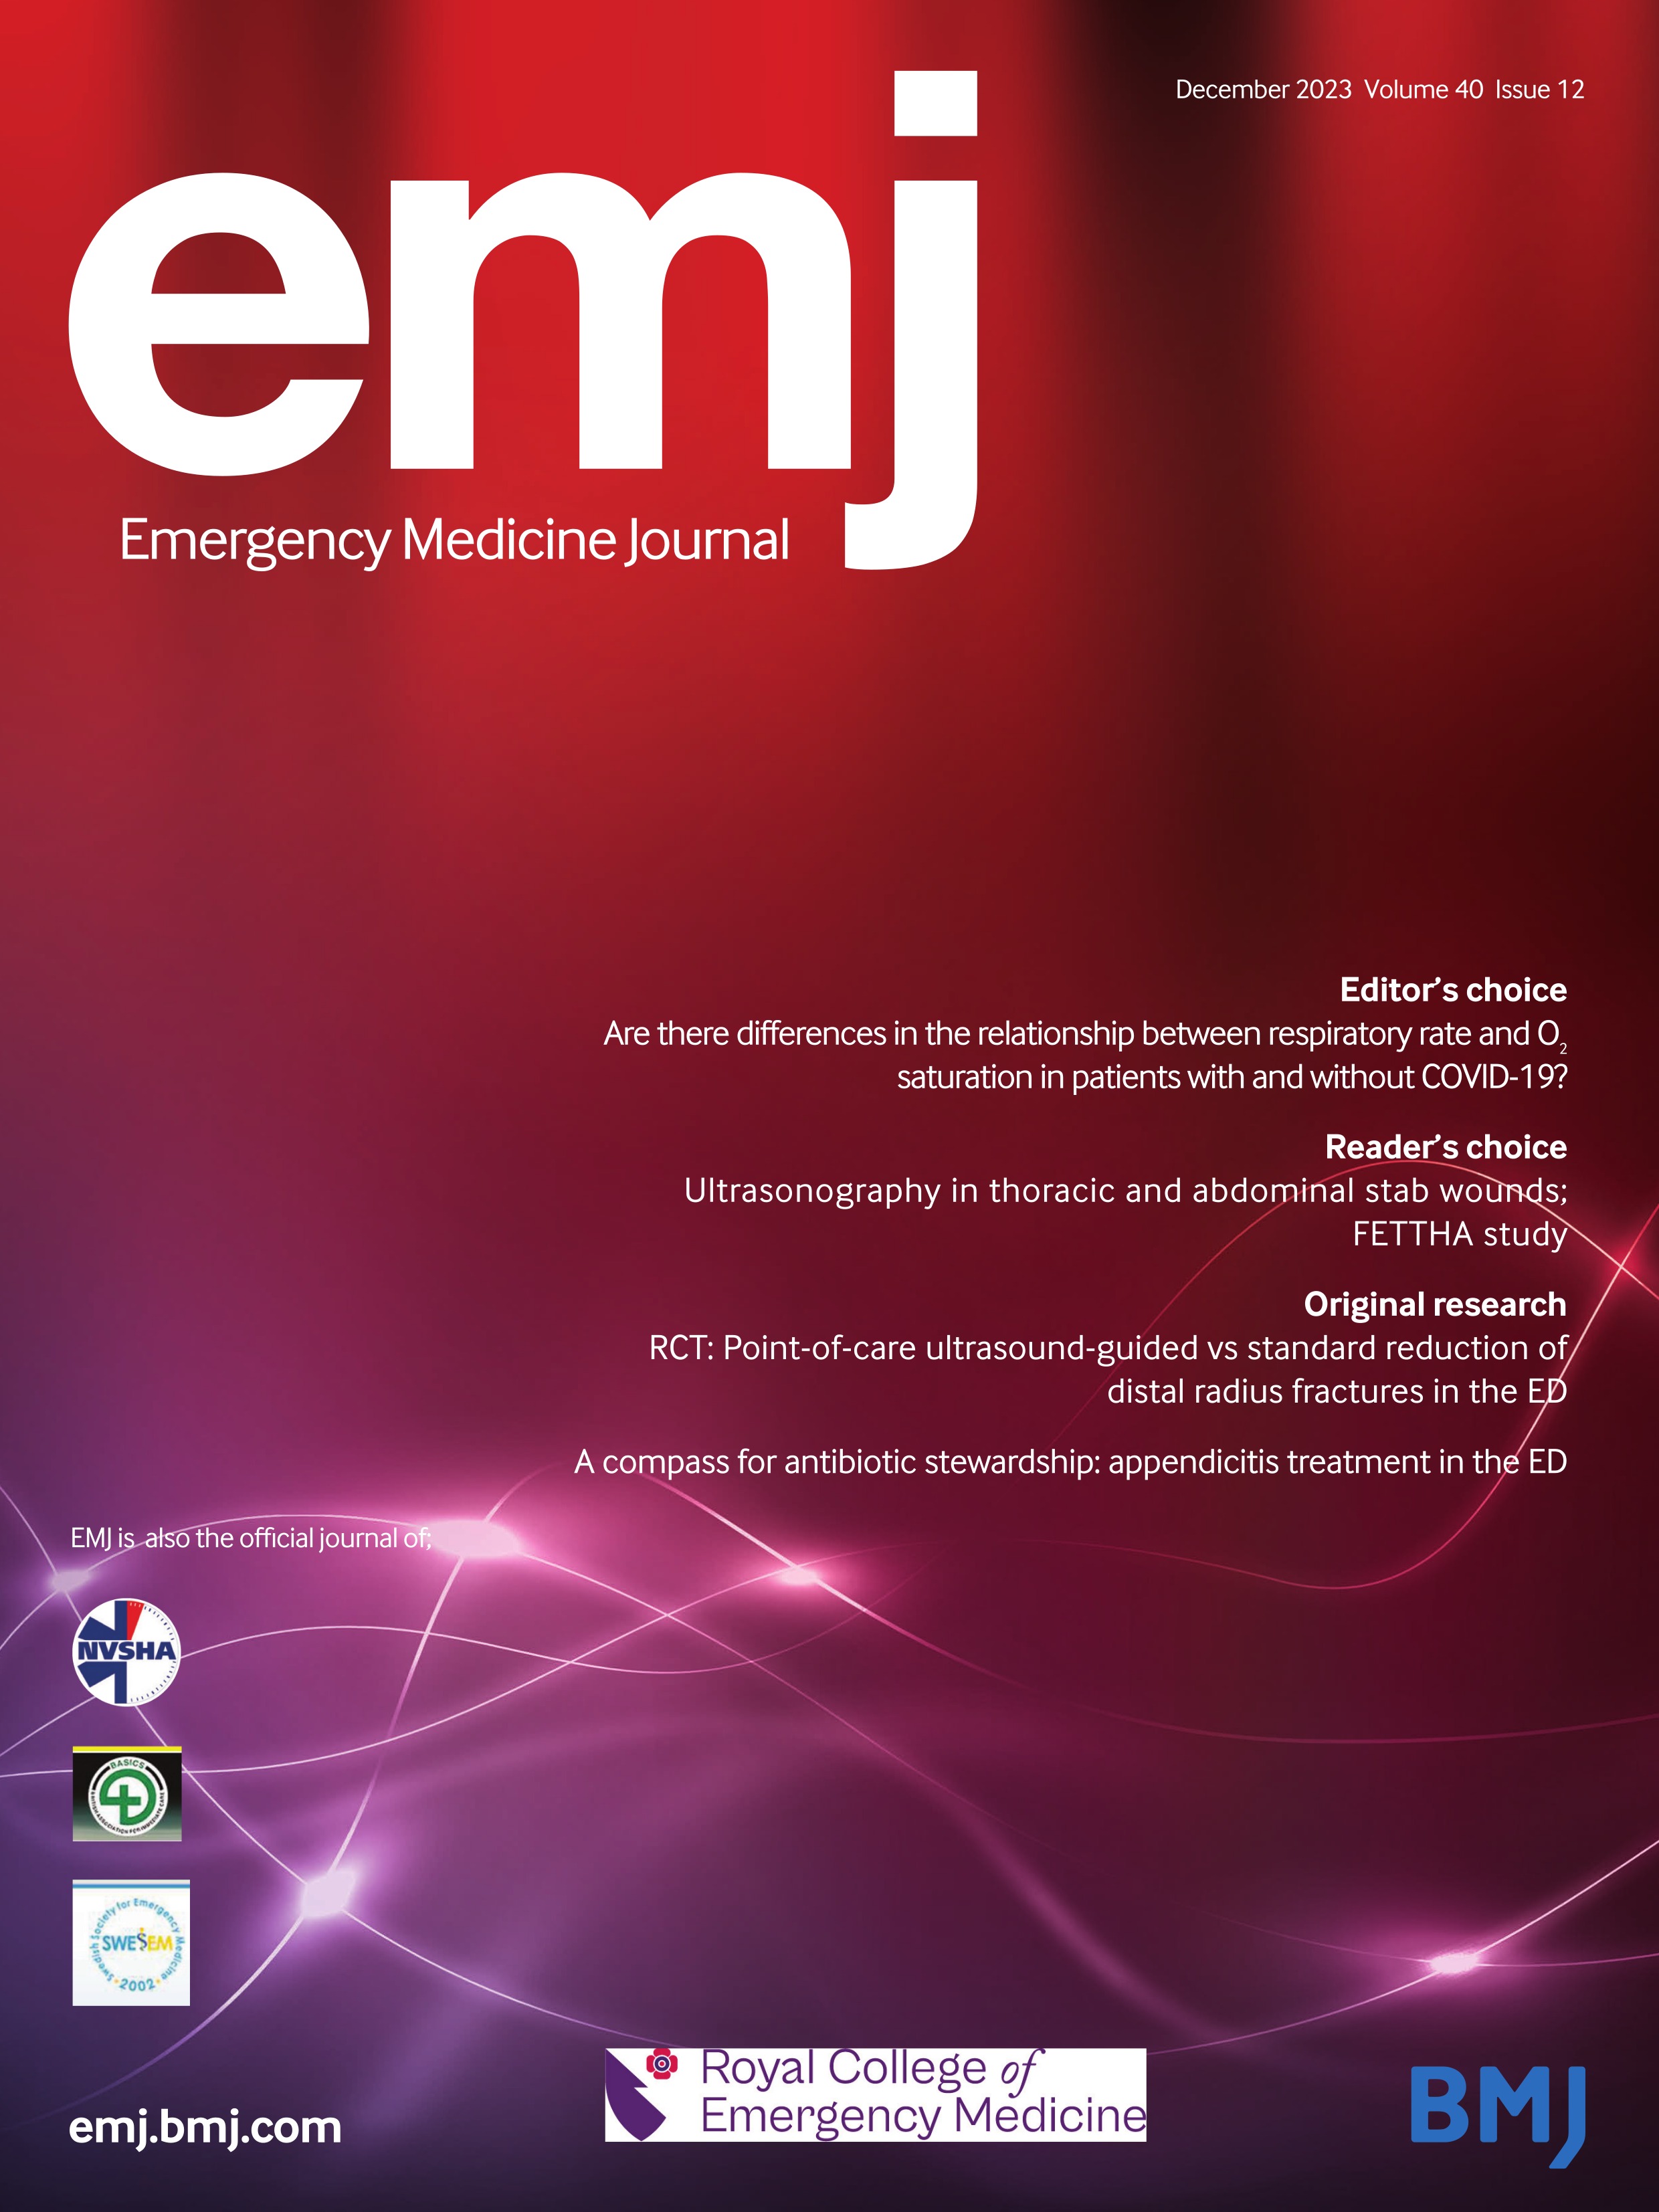 2343 Towards a cost-effective repeatable training model for HALO procedures: a pilot study of low-fidelity, user-resettable peer-directed simulation for EM trainees